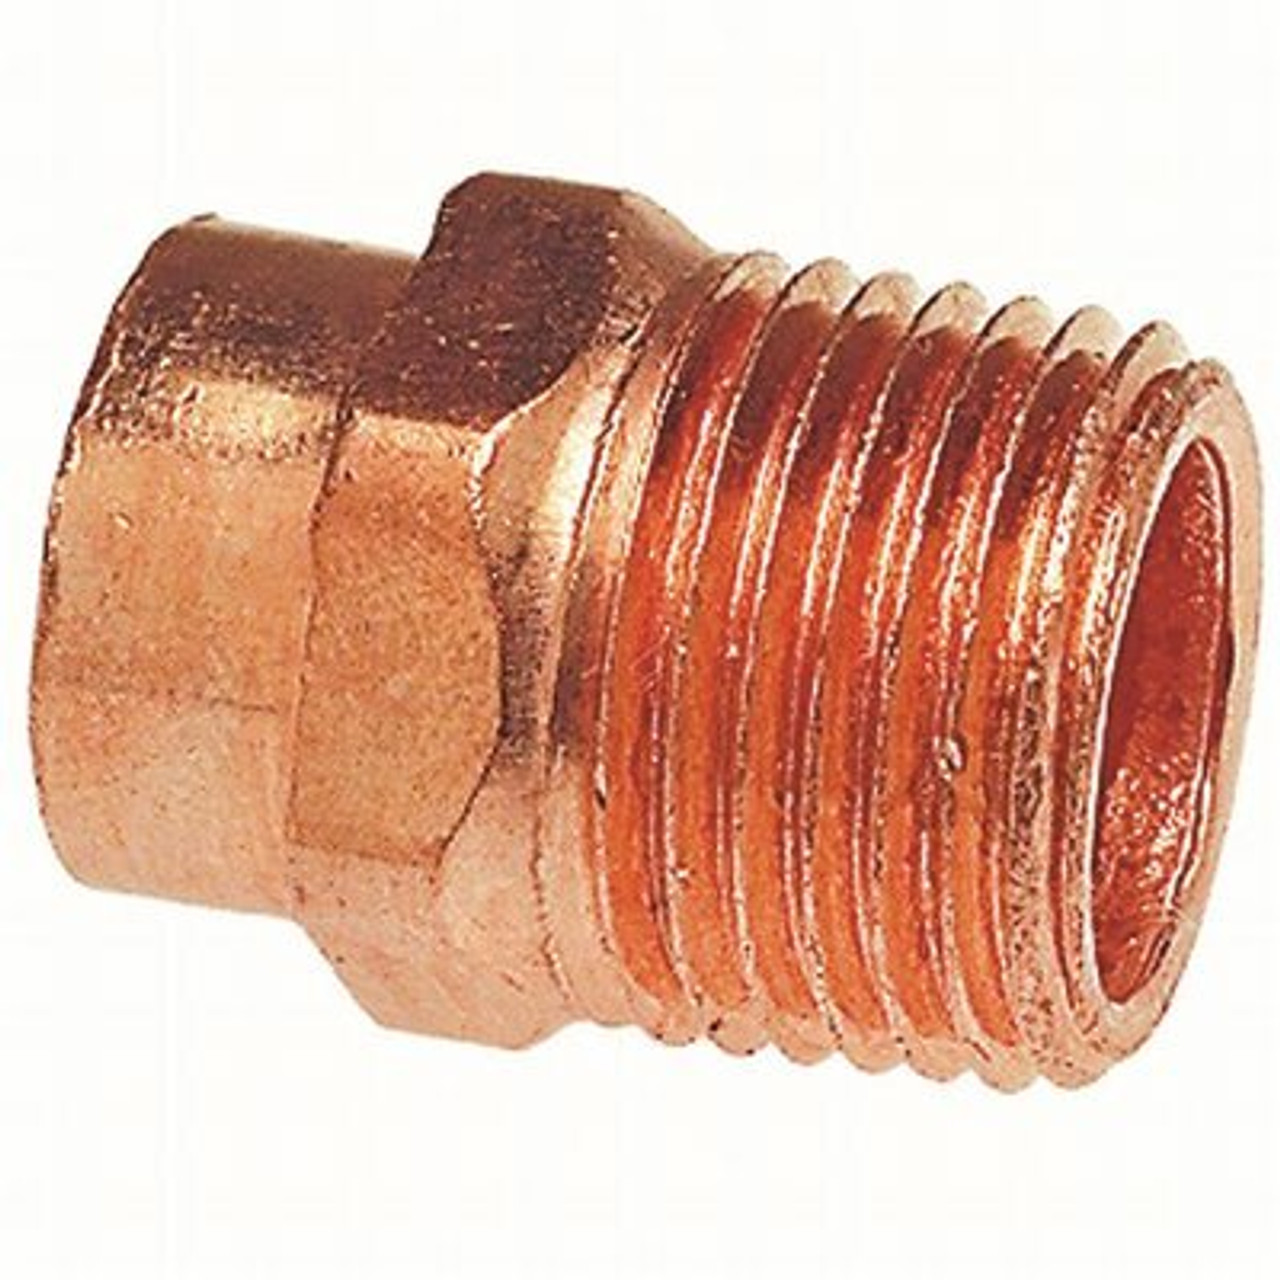 Nibco 3/4 In. Wrot Copper Cup X Mip Adapter Pro Pack (25-Pack)